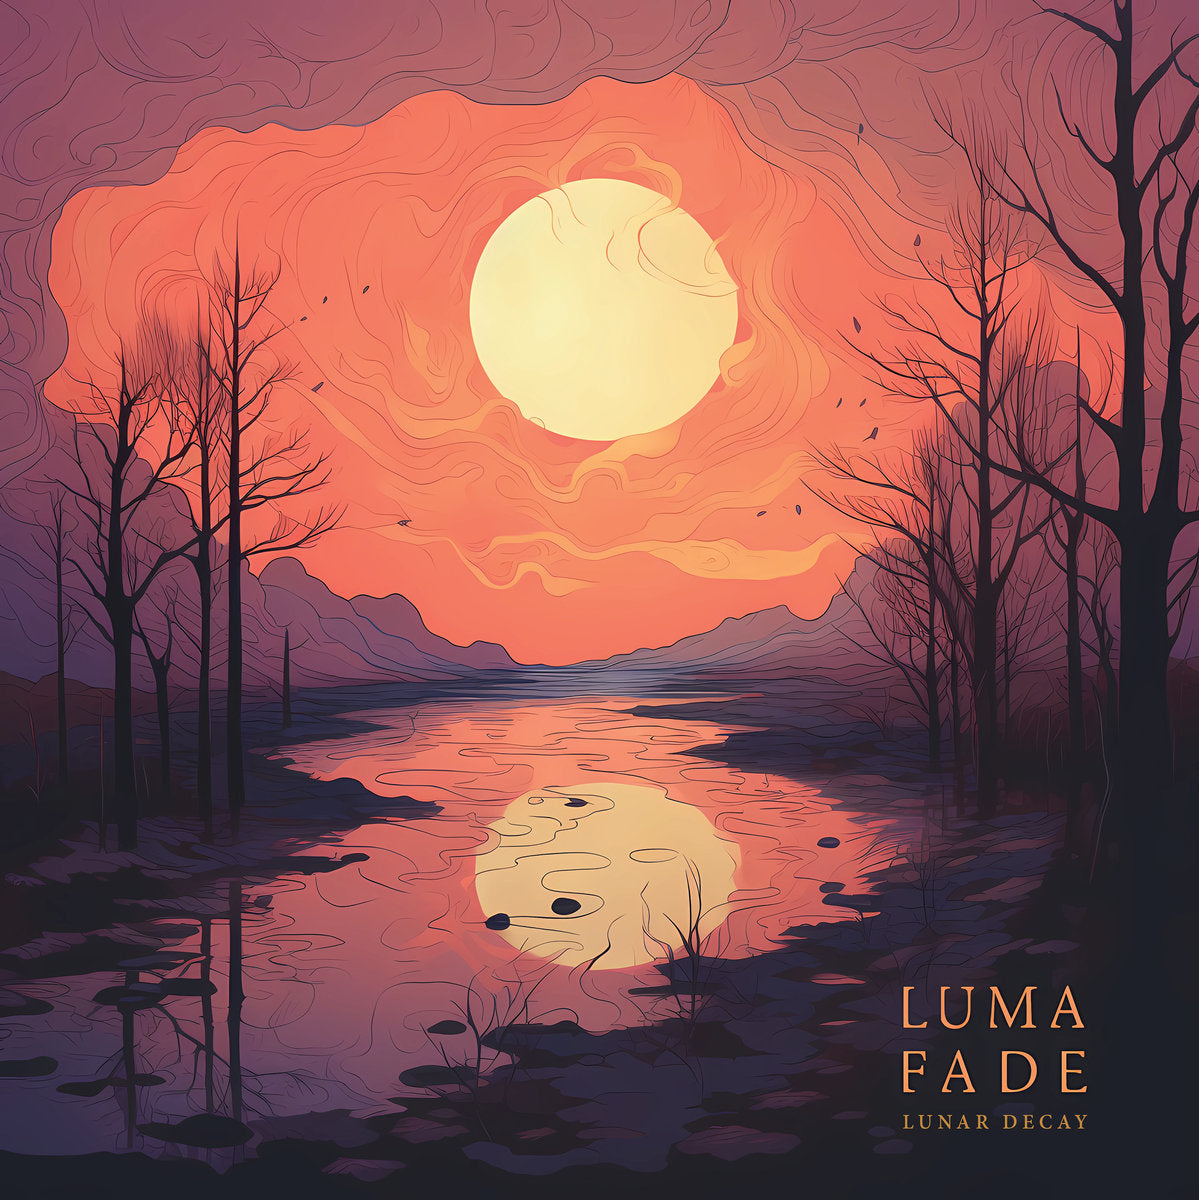 Luma Fade blends shoegaze and indie rock on the expansive ‘Lunar Decay’